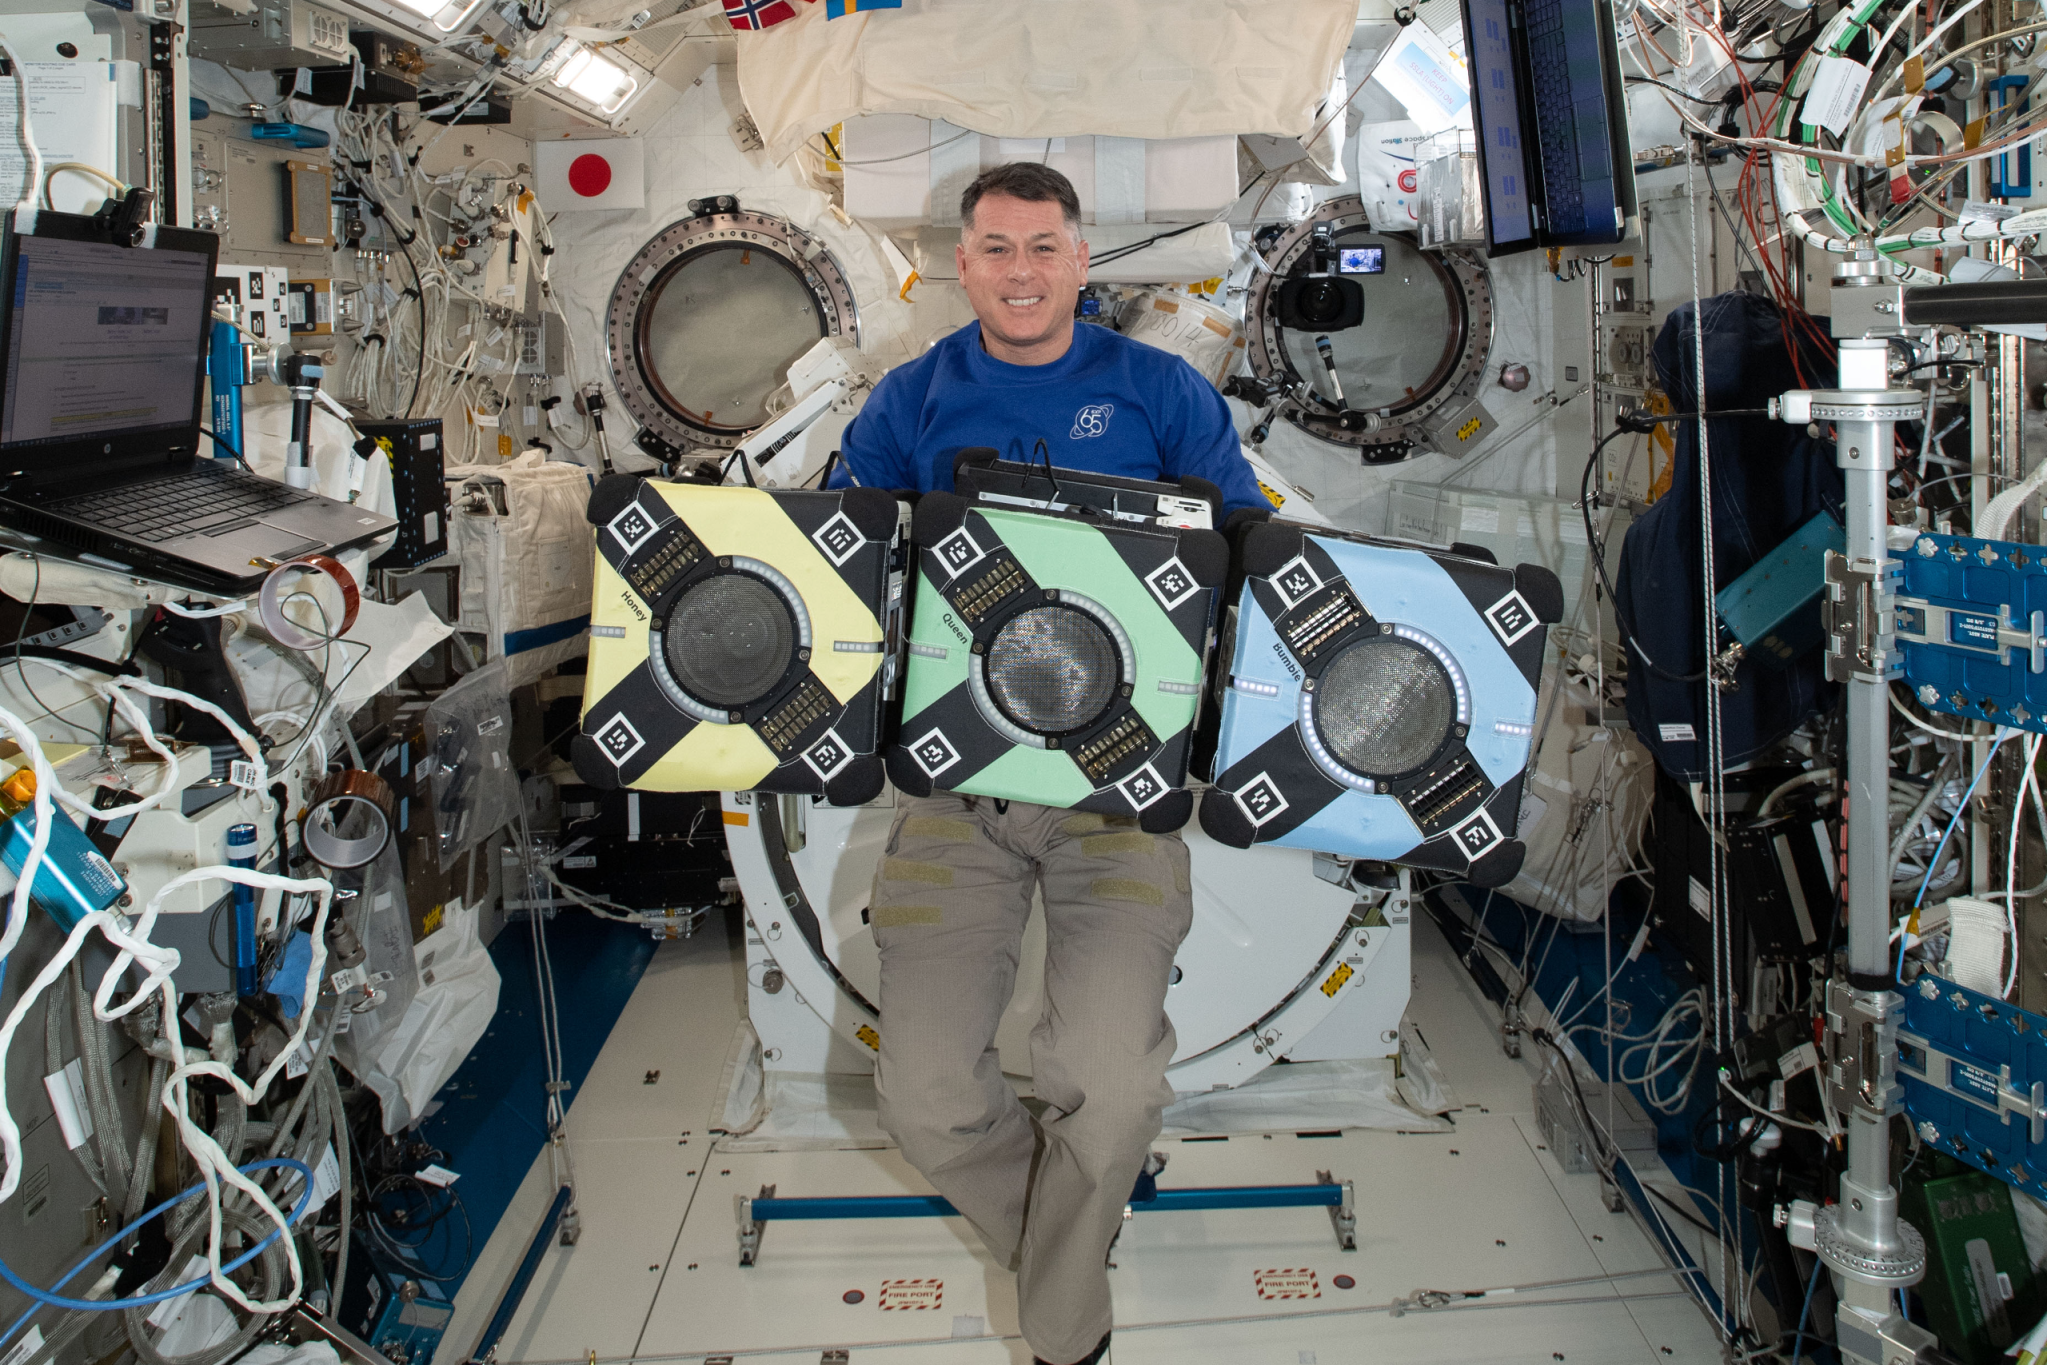 Astronaut in a blue polo floating behind three cube-shaped floating robots, colored yellow, green, and blue from left to right. All are in a hallway of the International Space Station.